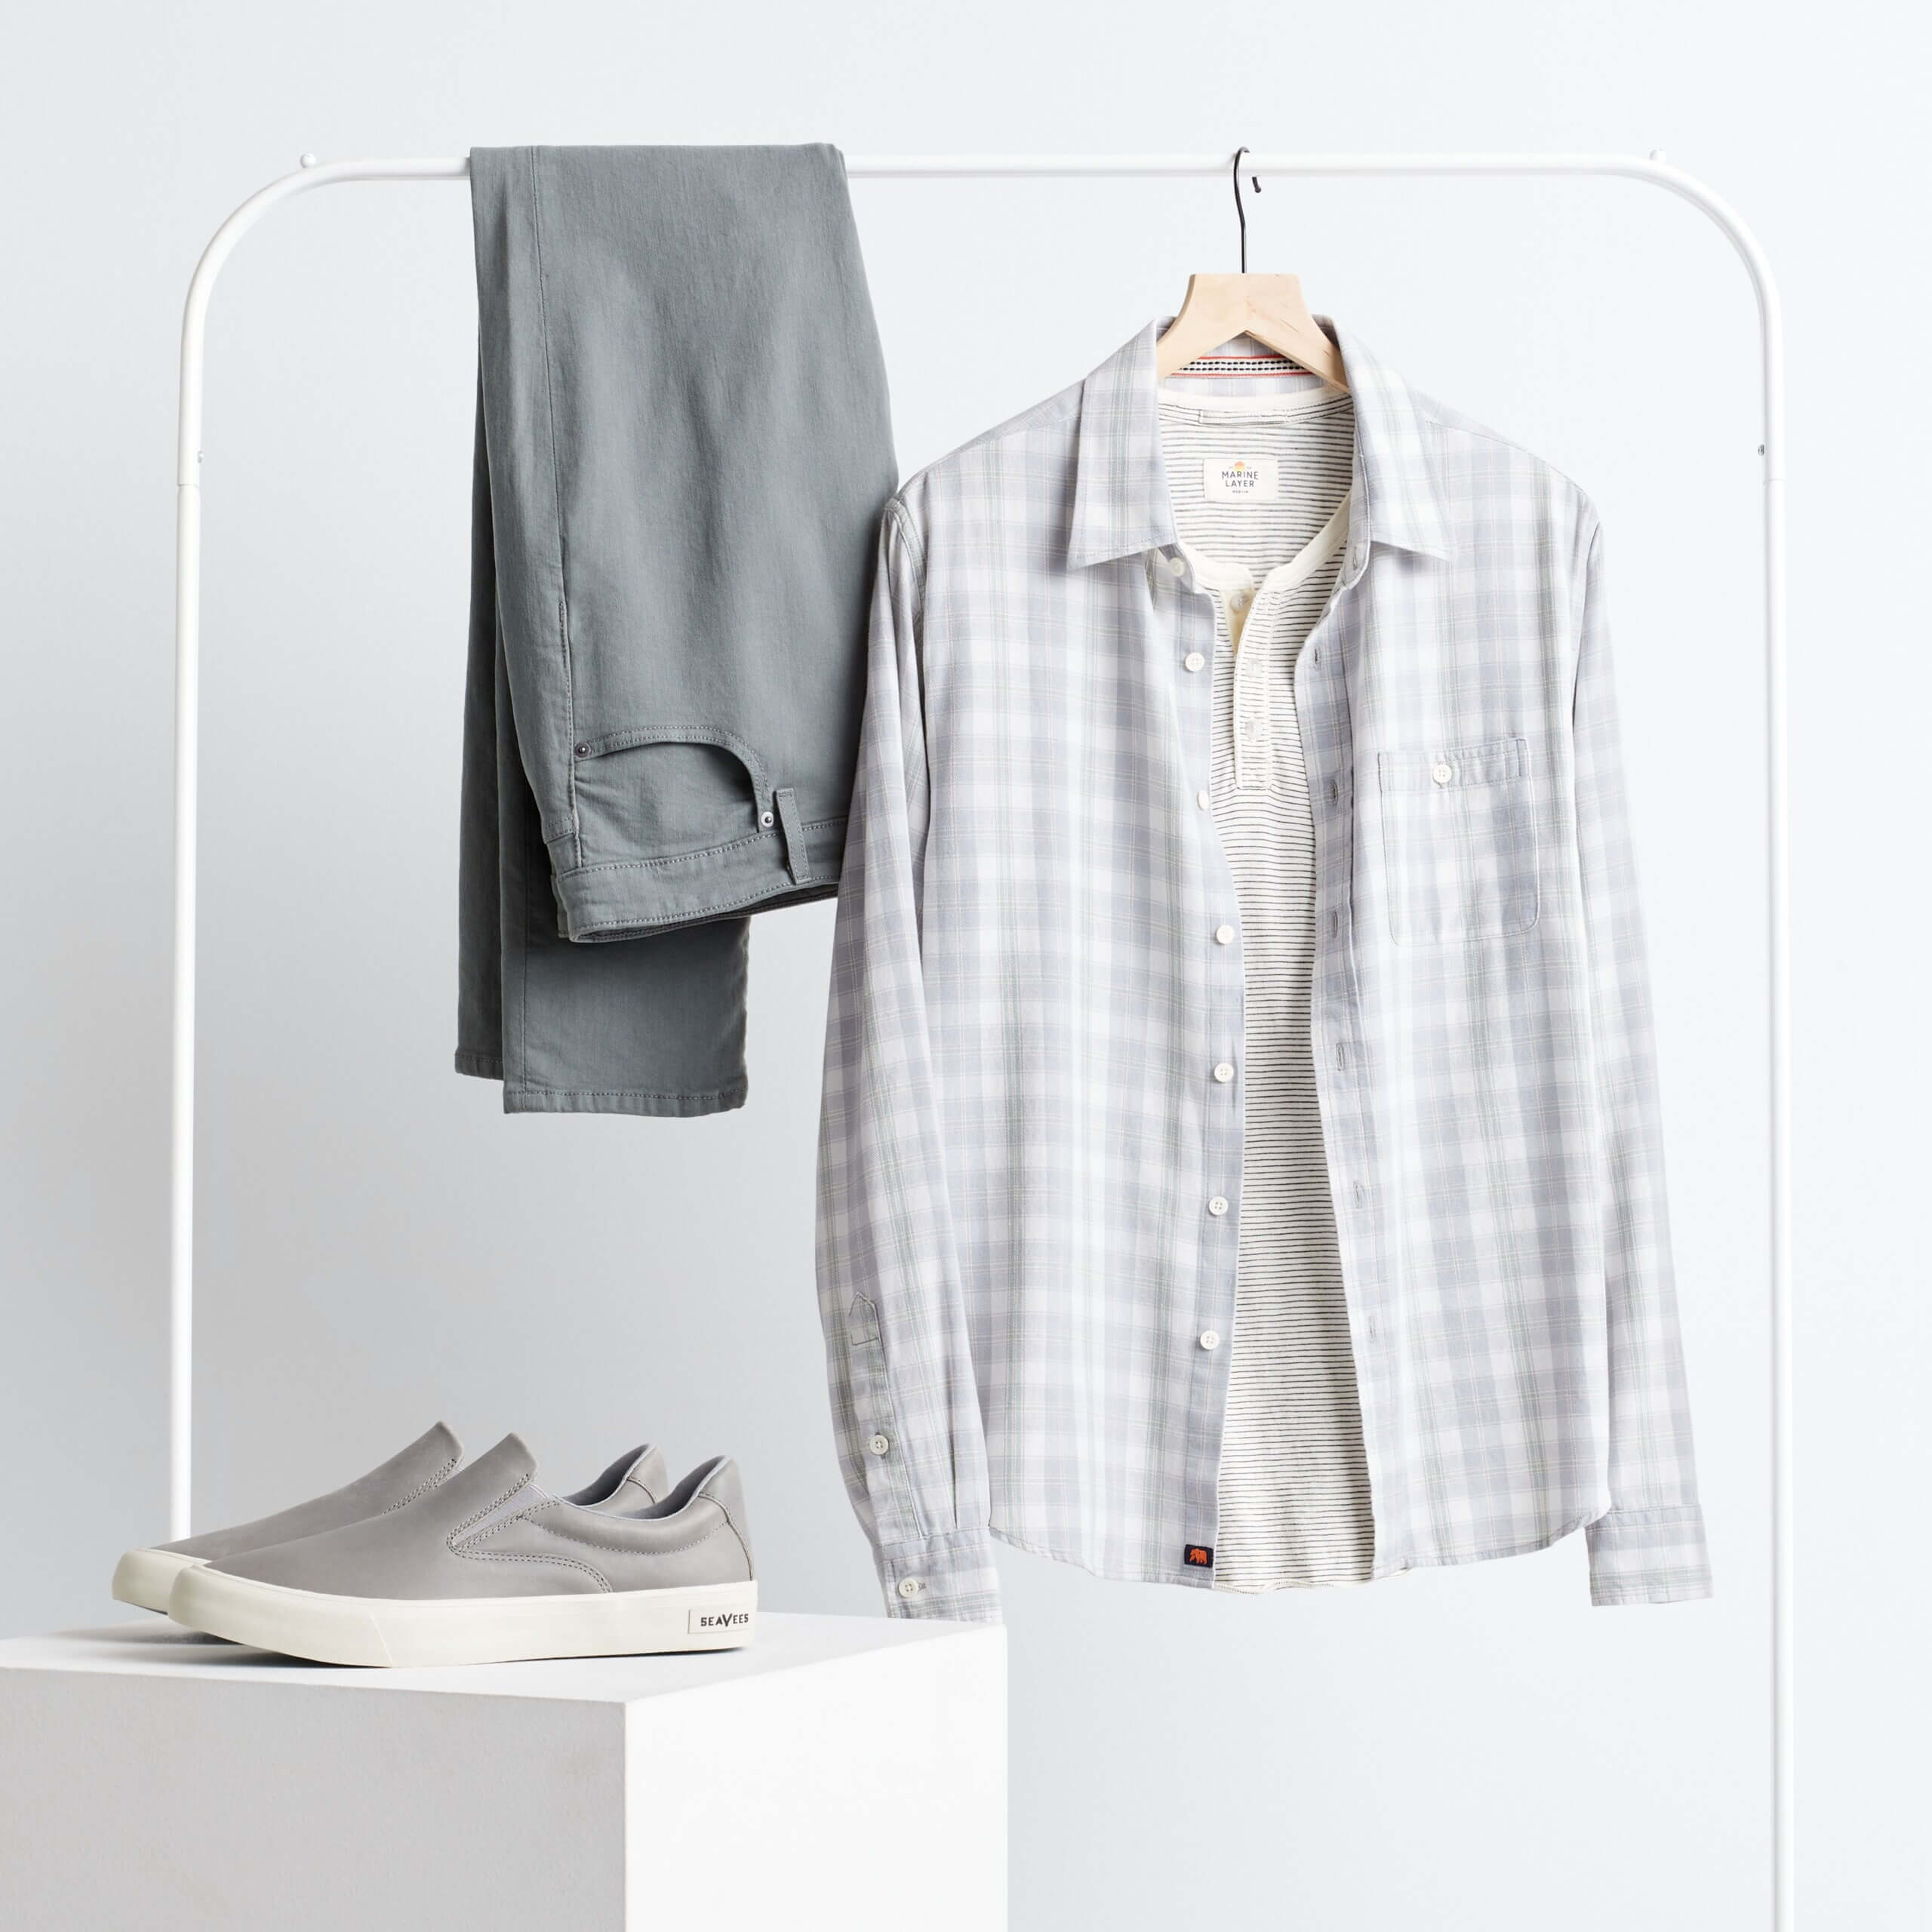 Stitch Fix men’s workleisure outfit with grey chinos draped over clothing rack with striped long-sleeve henley with light grey plaid button-down shirt on hanger and grey slip-on sneakers on platform.